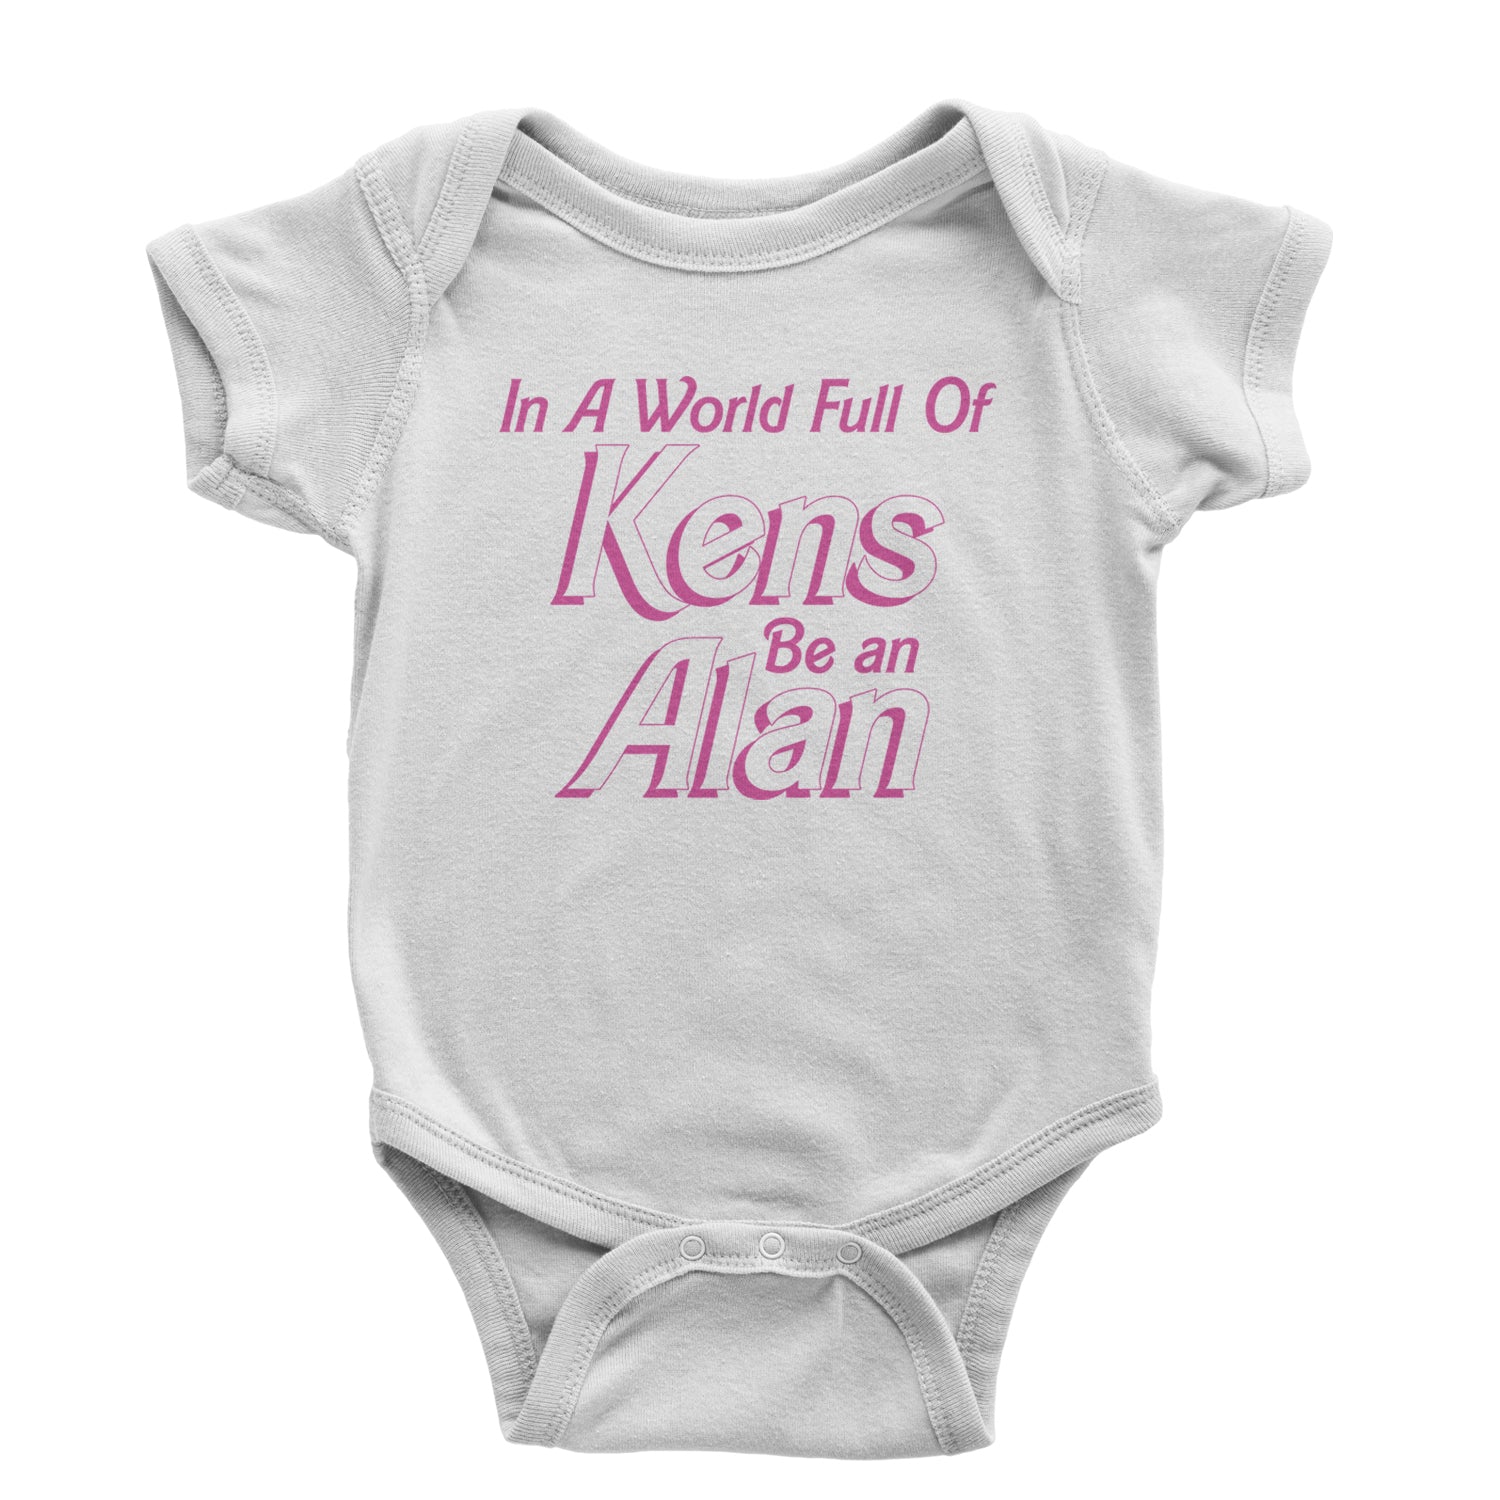 In A World Full Of Kens, Be an Alan Infant One-Piece Romper Bodysuit and Toddler T-shirt